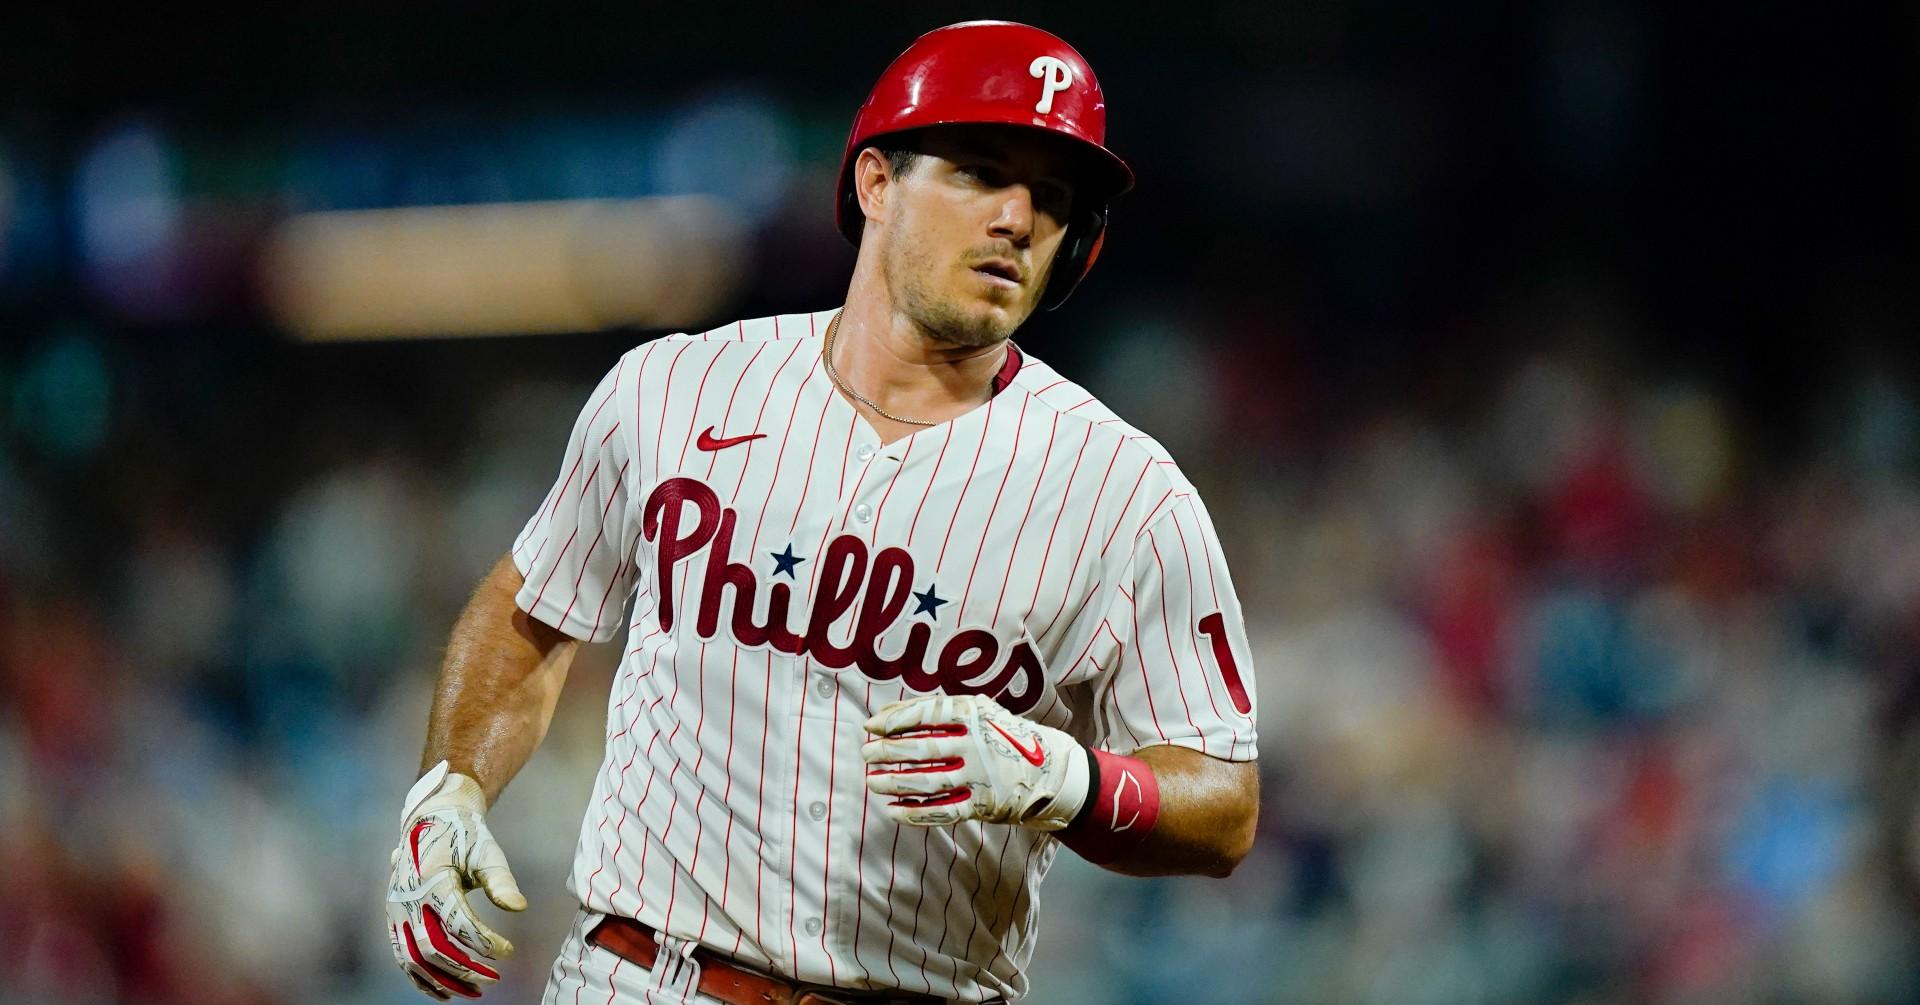 Phillies vs. Reds Betting Odds, Picks and Predictions - Tuesday, August 16, 2022